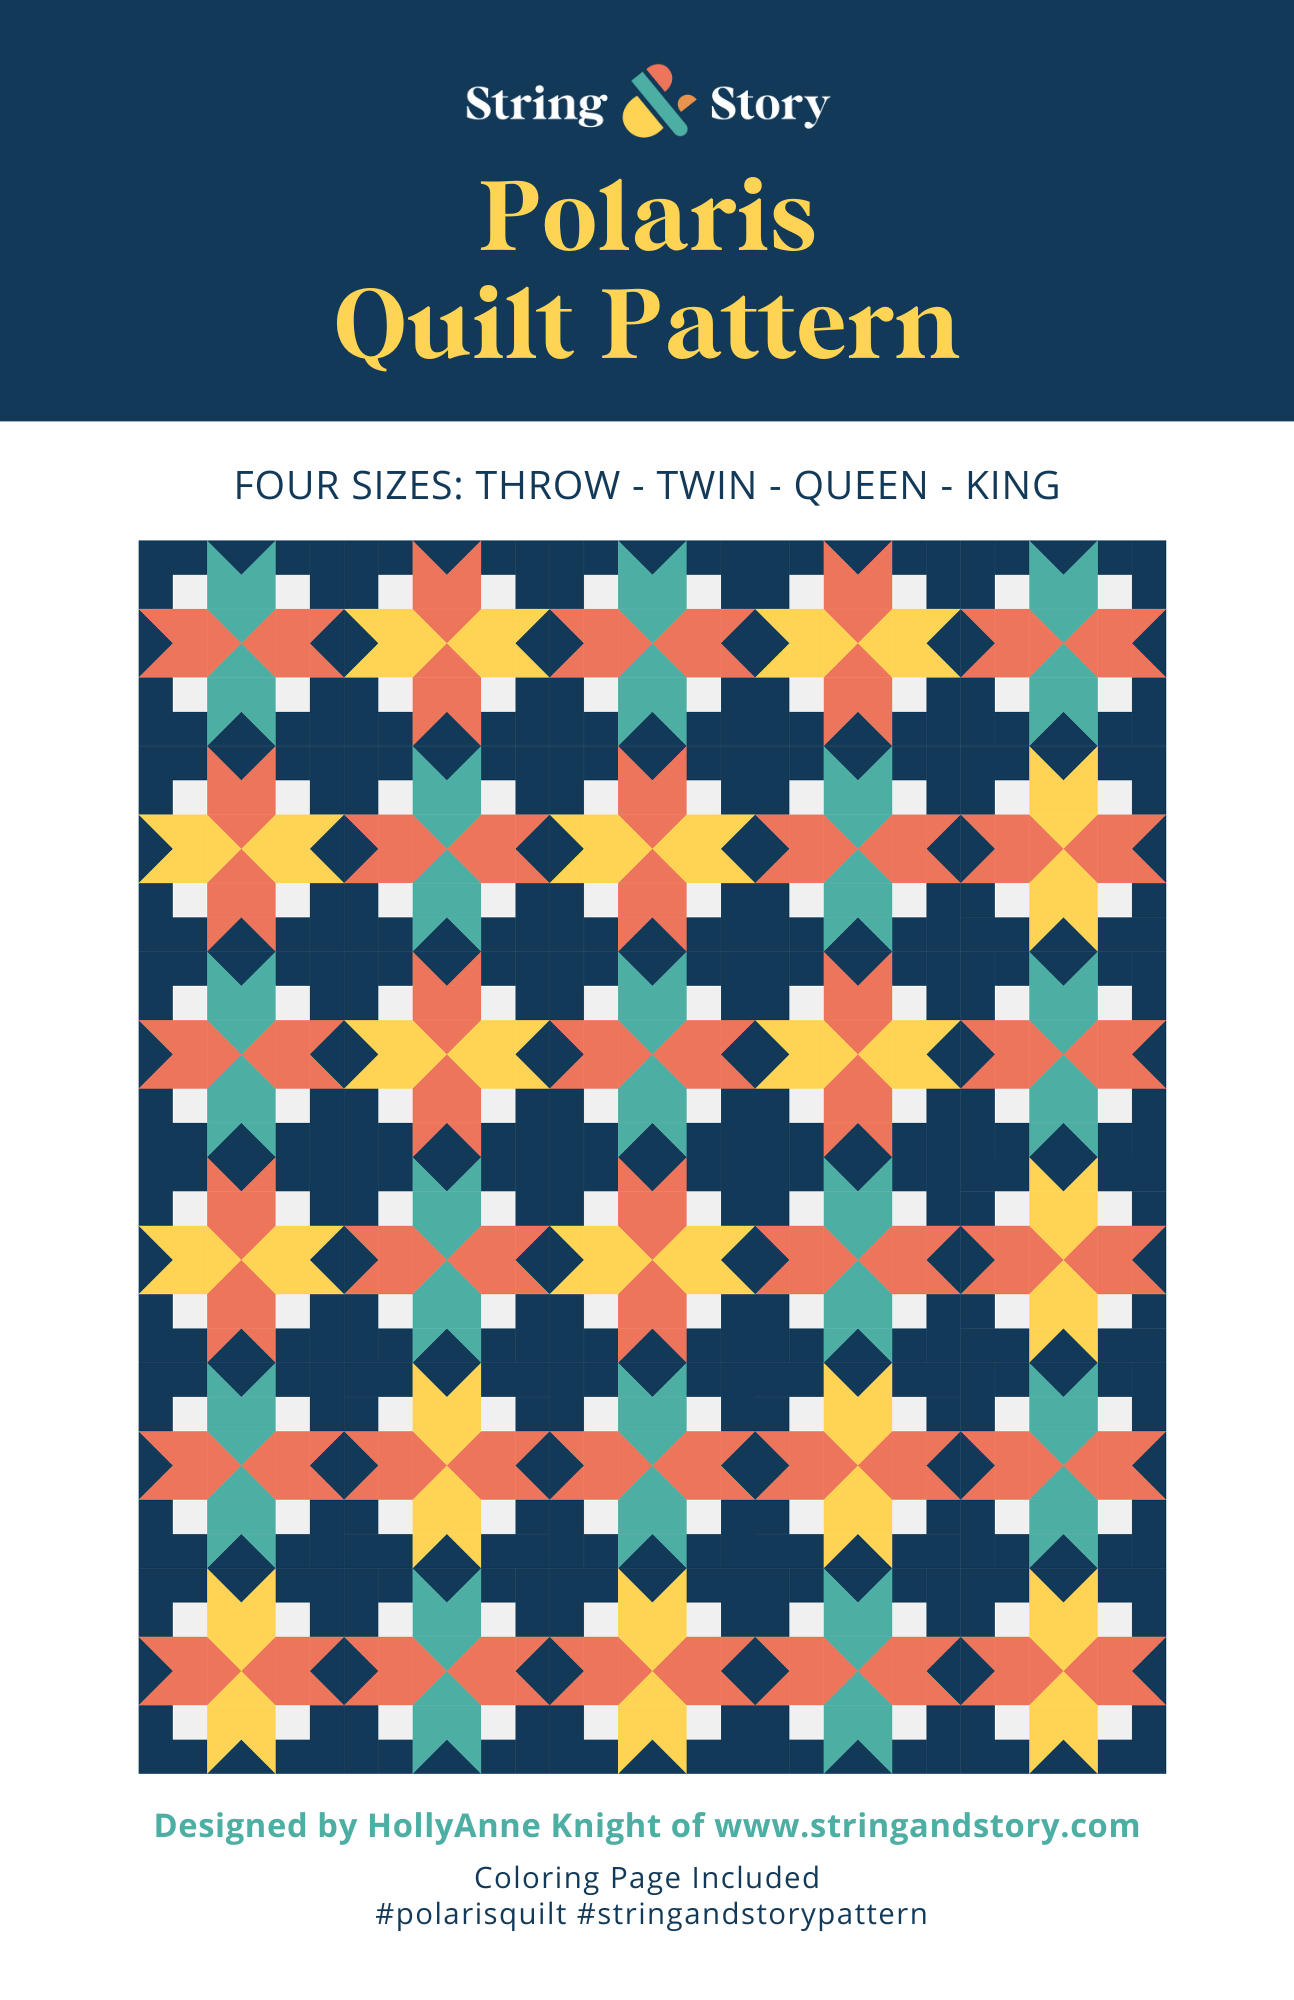 Patterns: Polaris Quilt  - DIGITAL PATTERN by HollyAnne Knight for String & Story